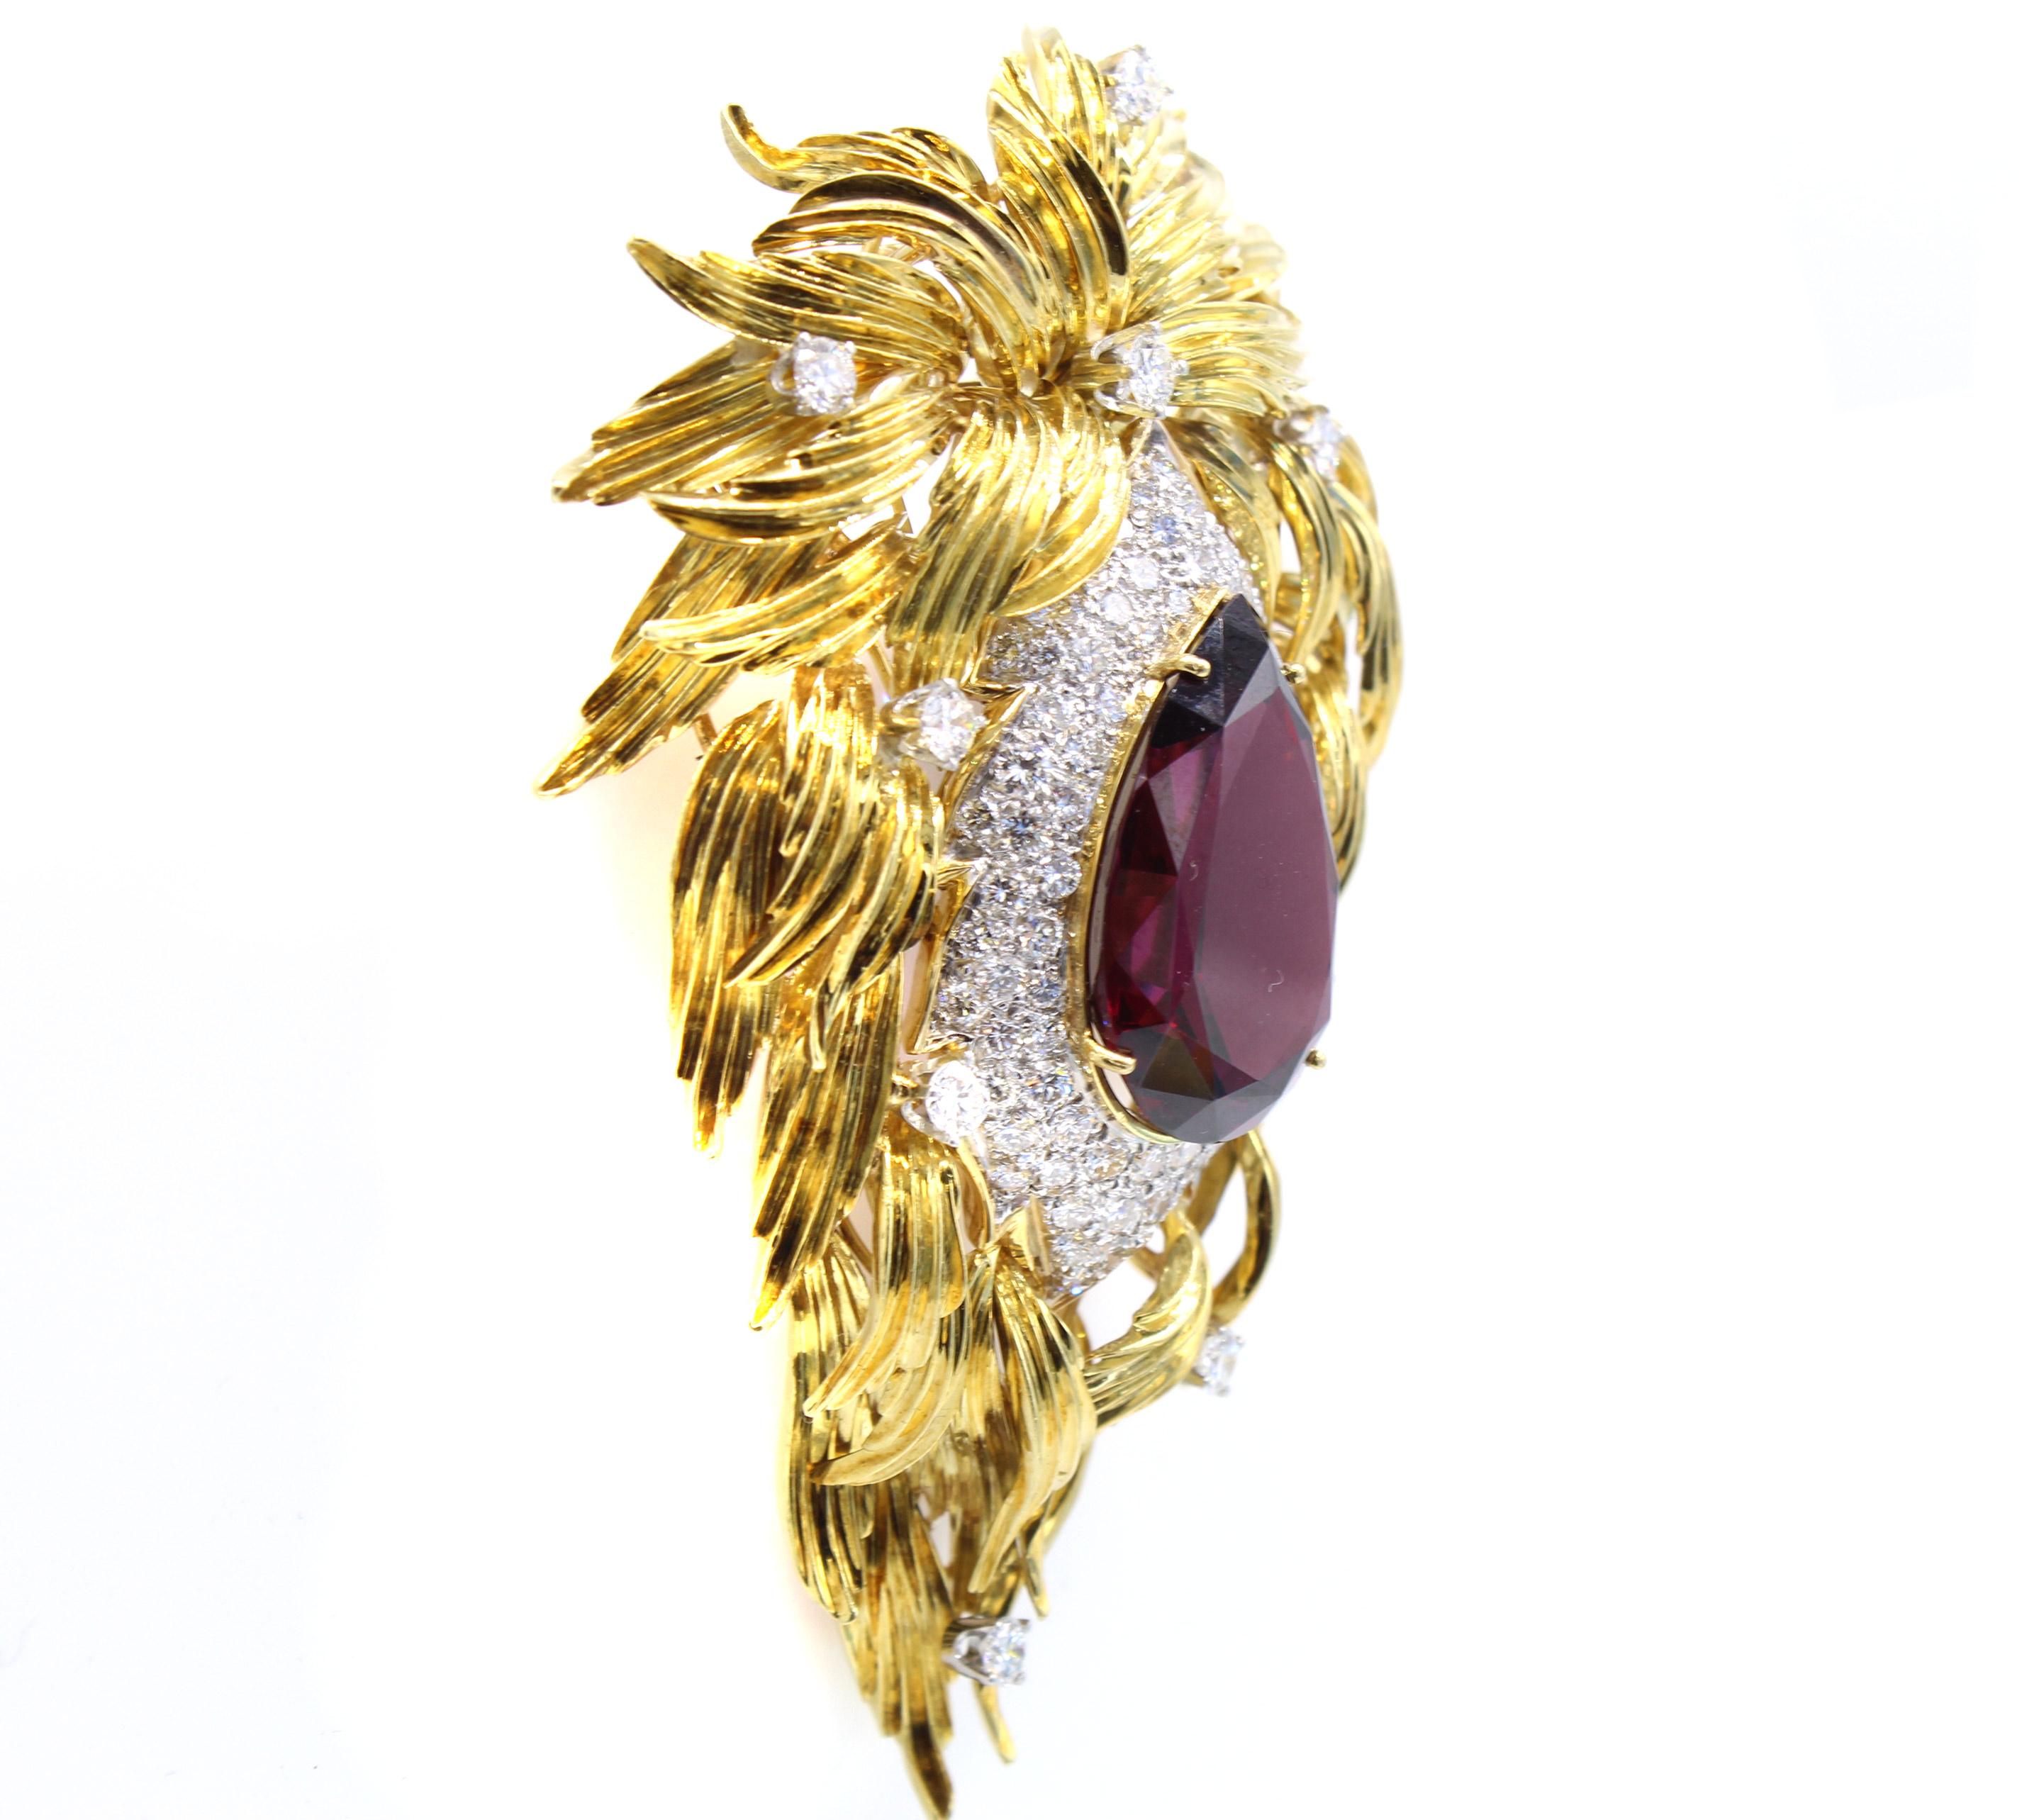 Beautifully designed and masterfully hand-crafted this unique and bold 1980s brooch by Henry Dunay features a pear-shape Rhodolite Garnet measured to weigh approximately 32 carats. Surrounding the center gem are 103 bright white brilliant cut